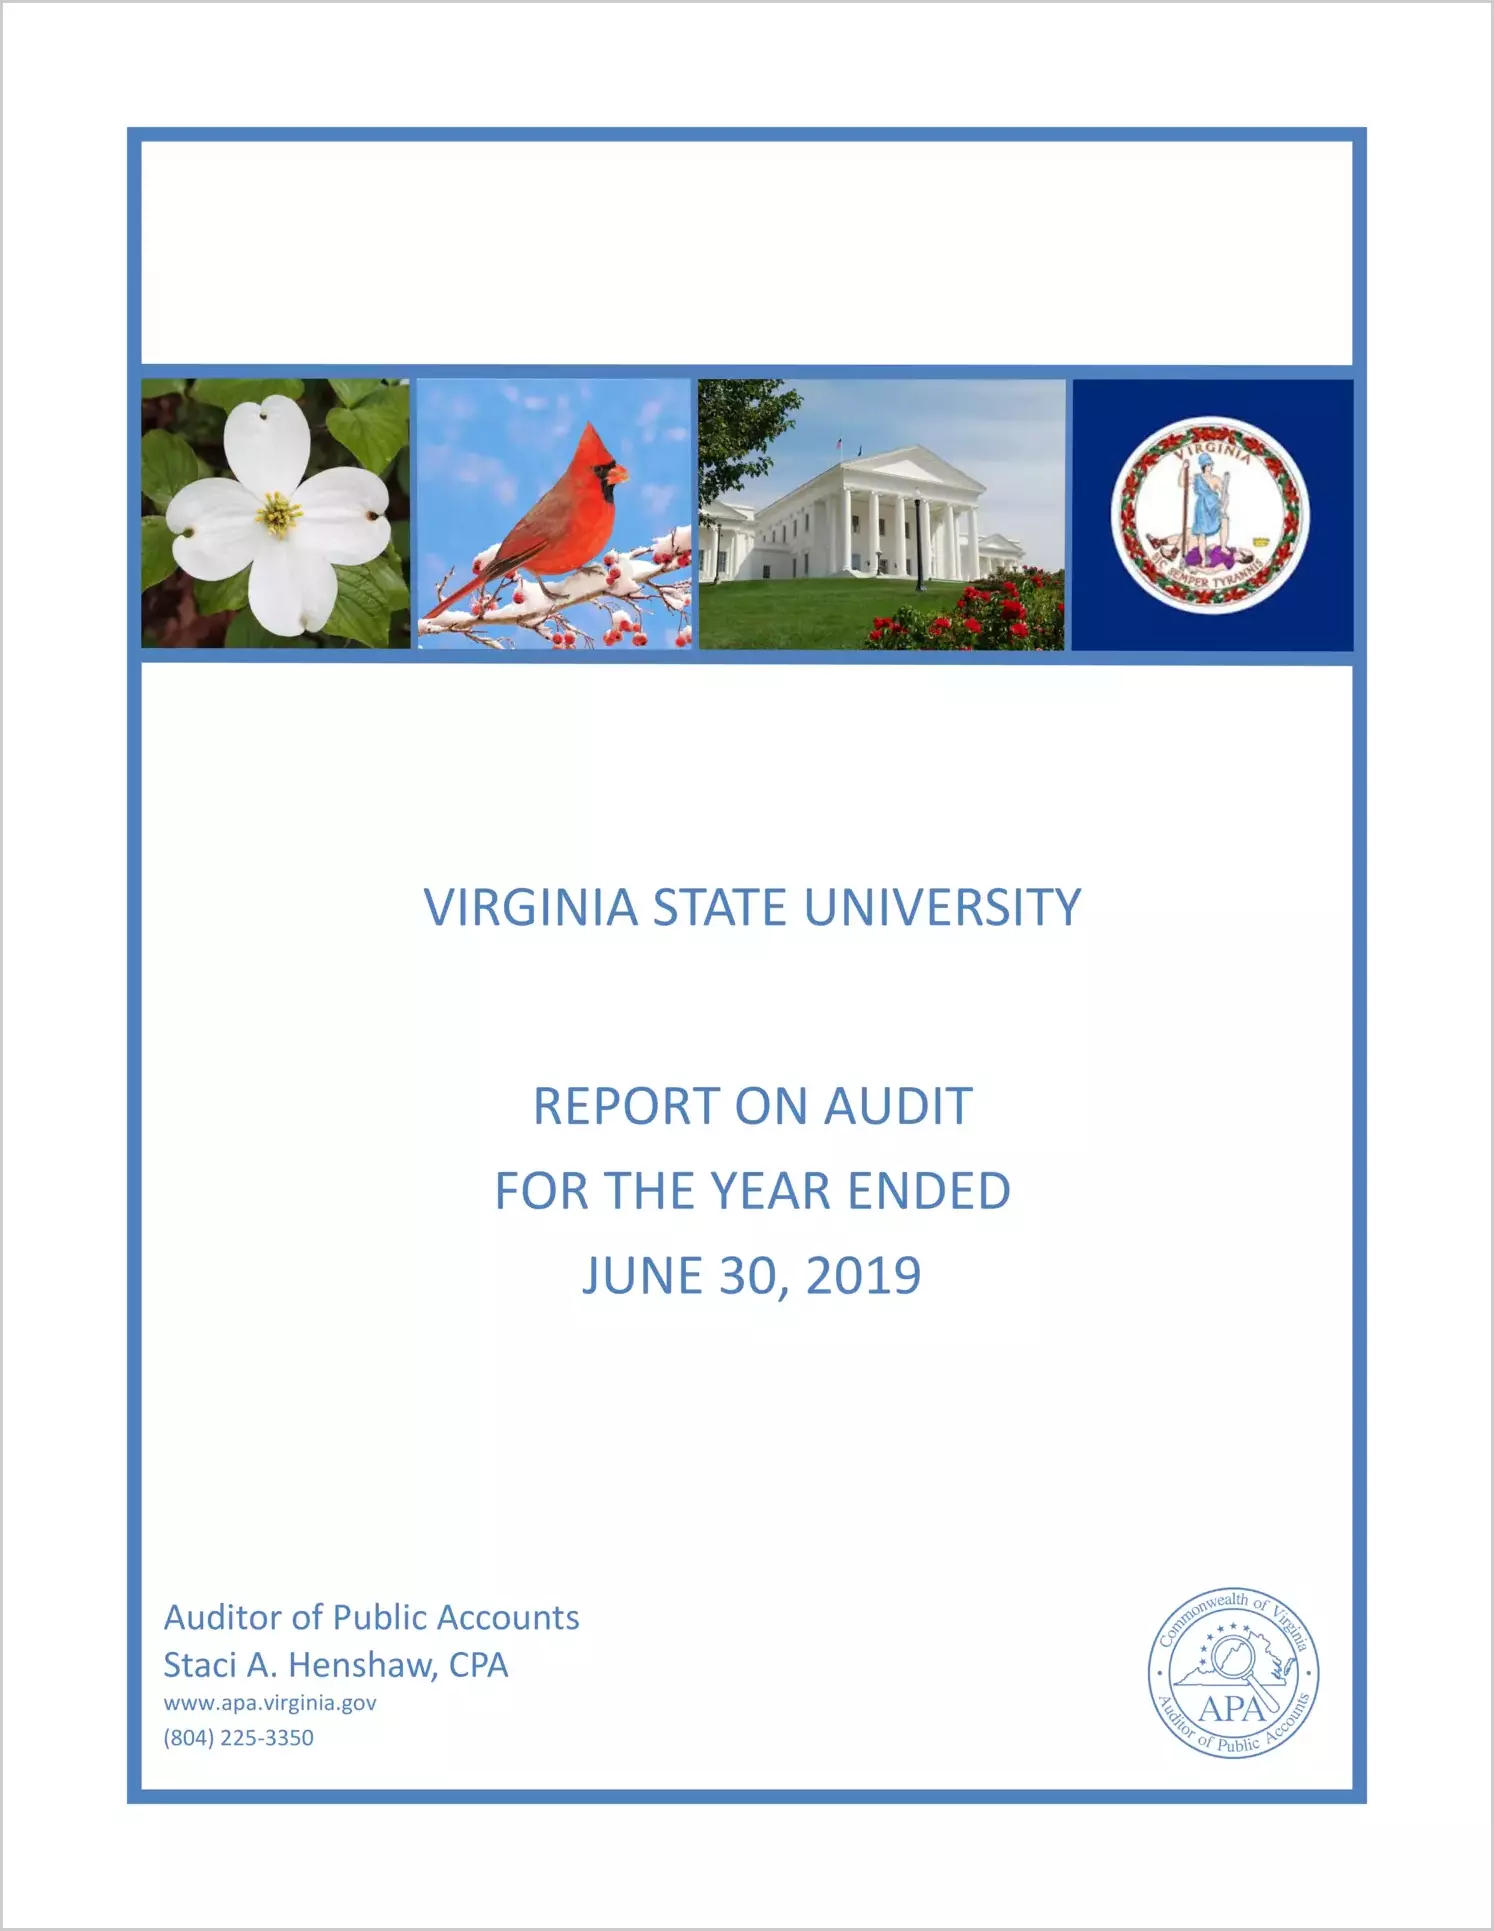 Virginia State University for the year ended June 30, 2019